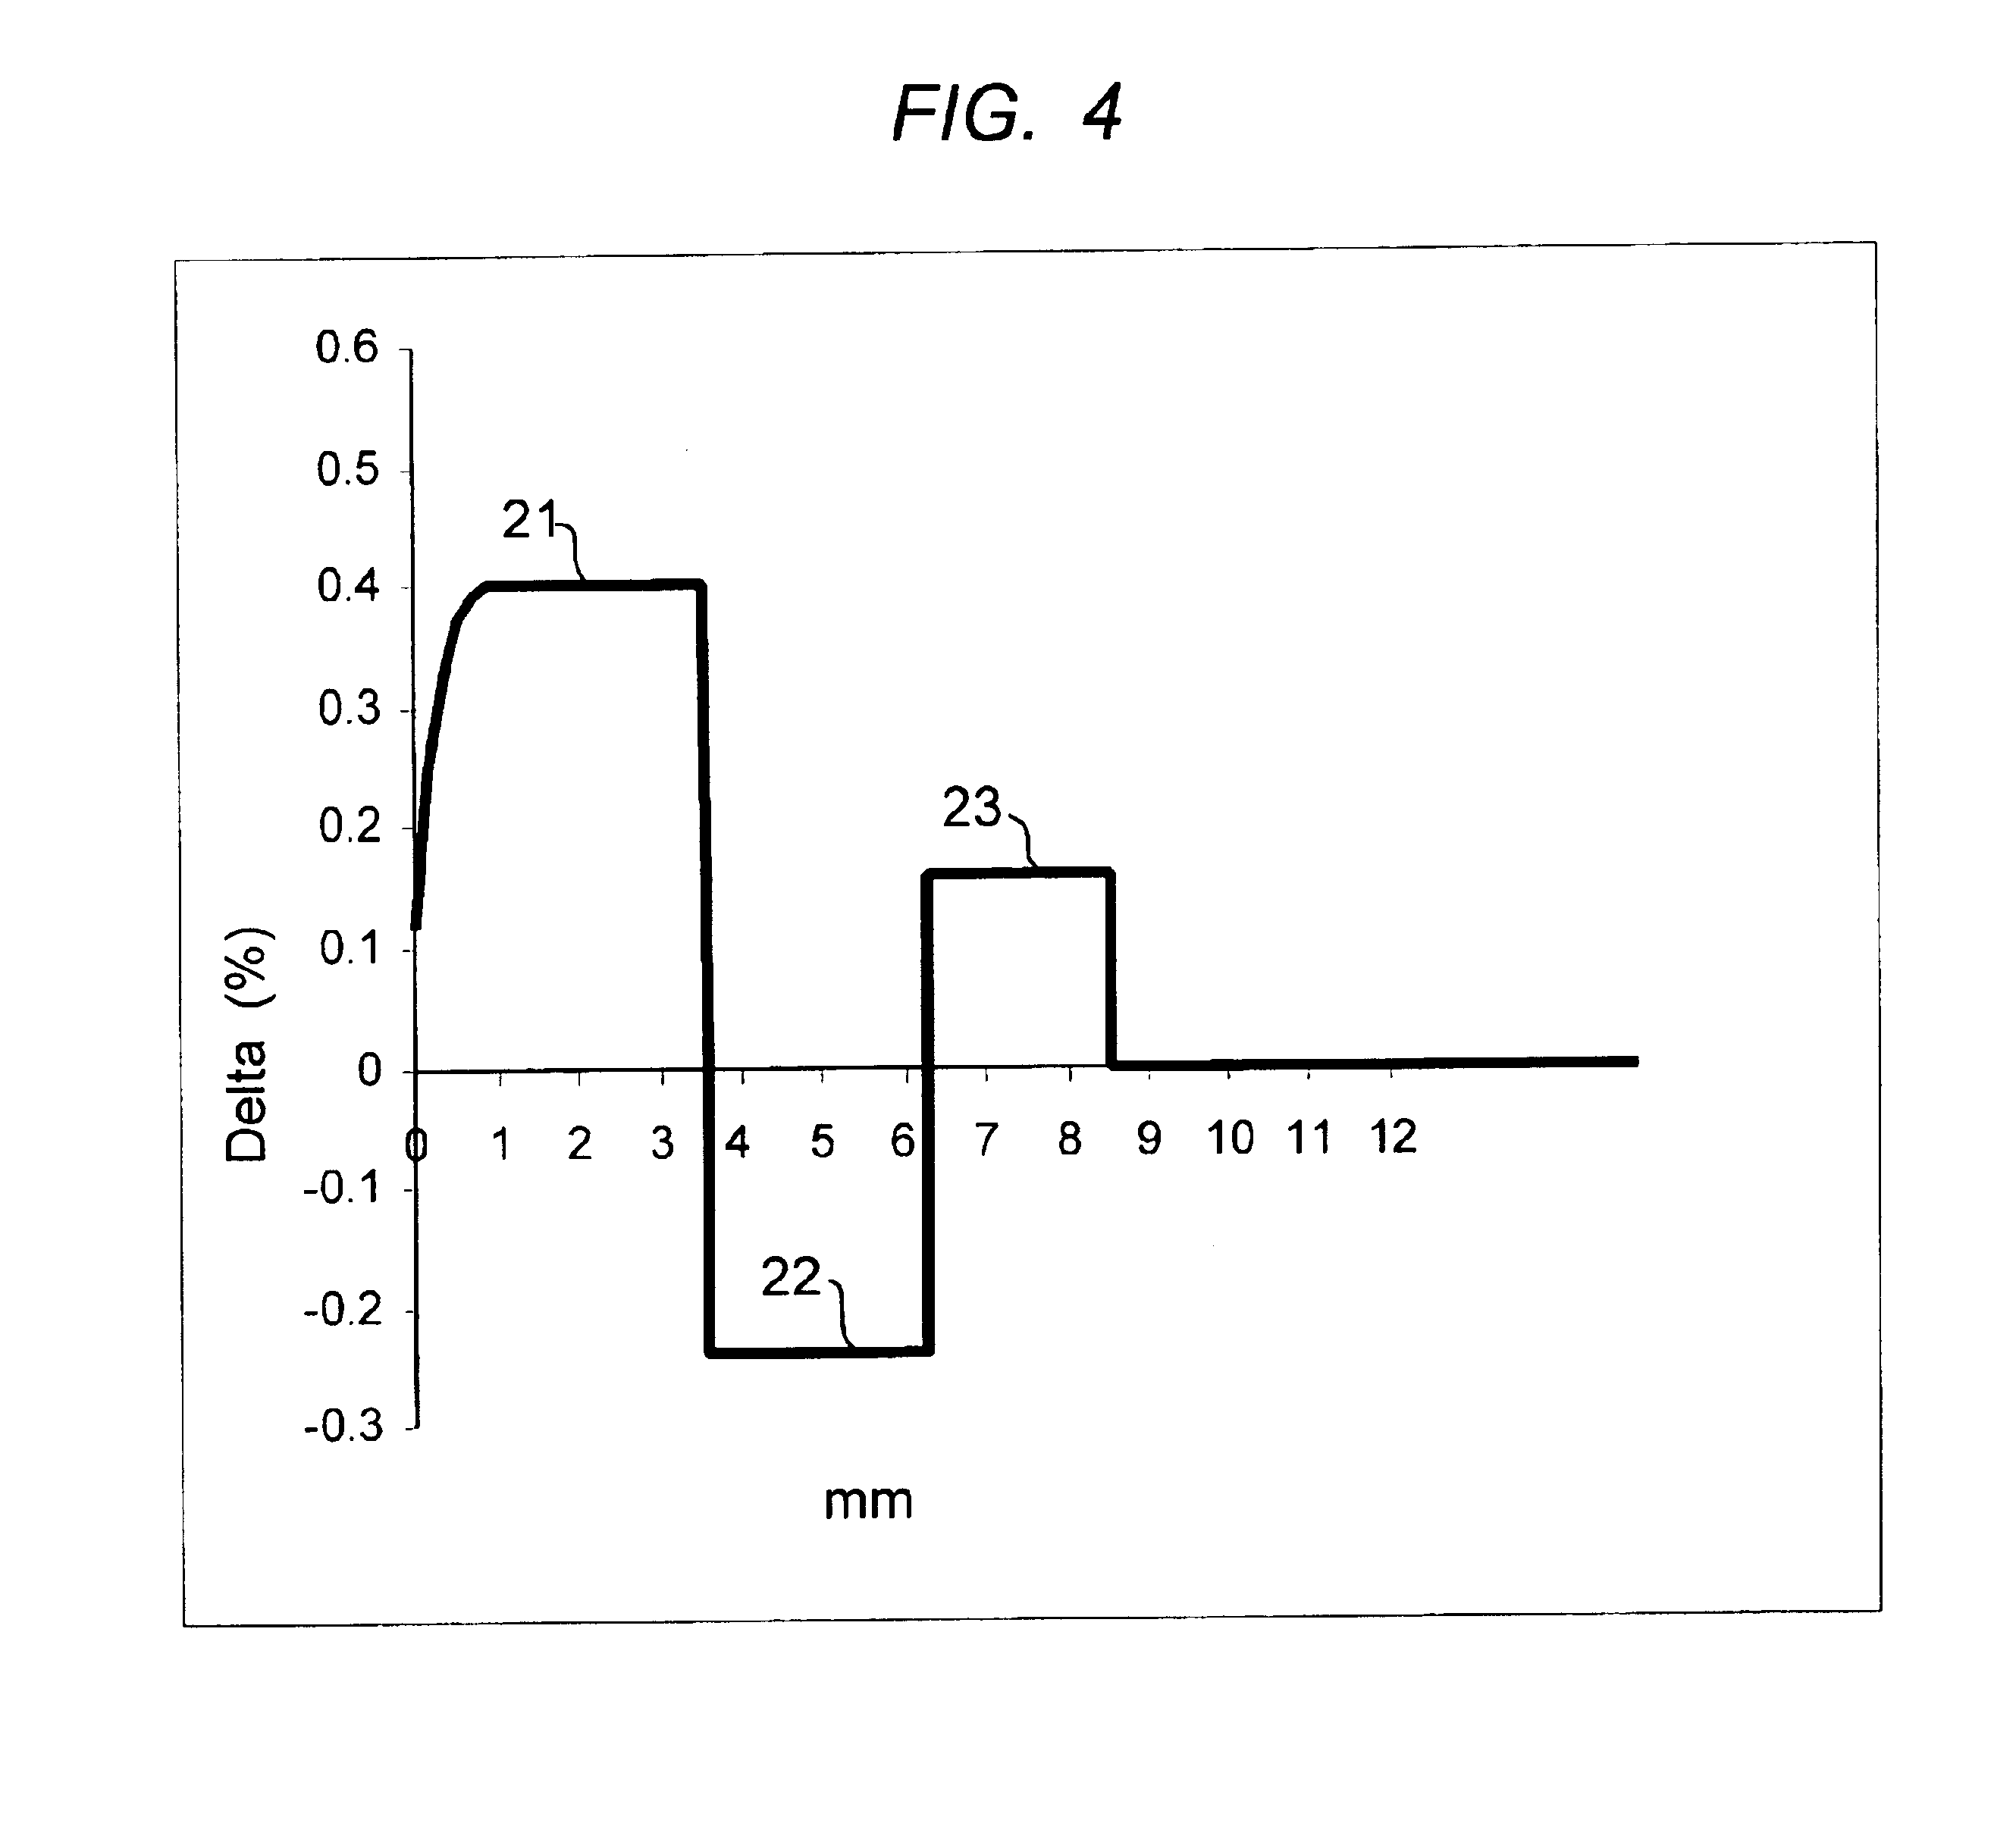 Method for the manufacture of optical fibers, improved optical fibers, and improved raman fiber amplifier communication systems